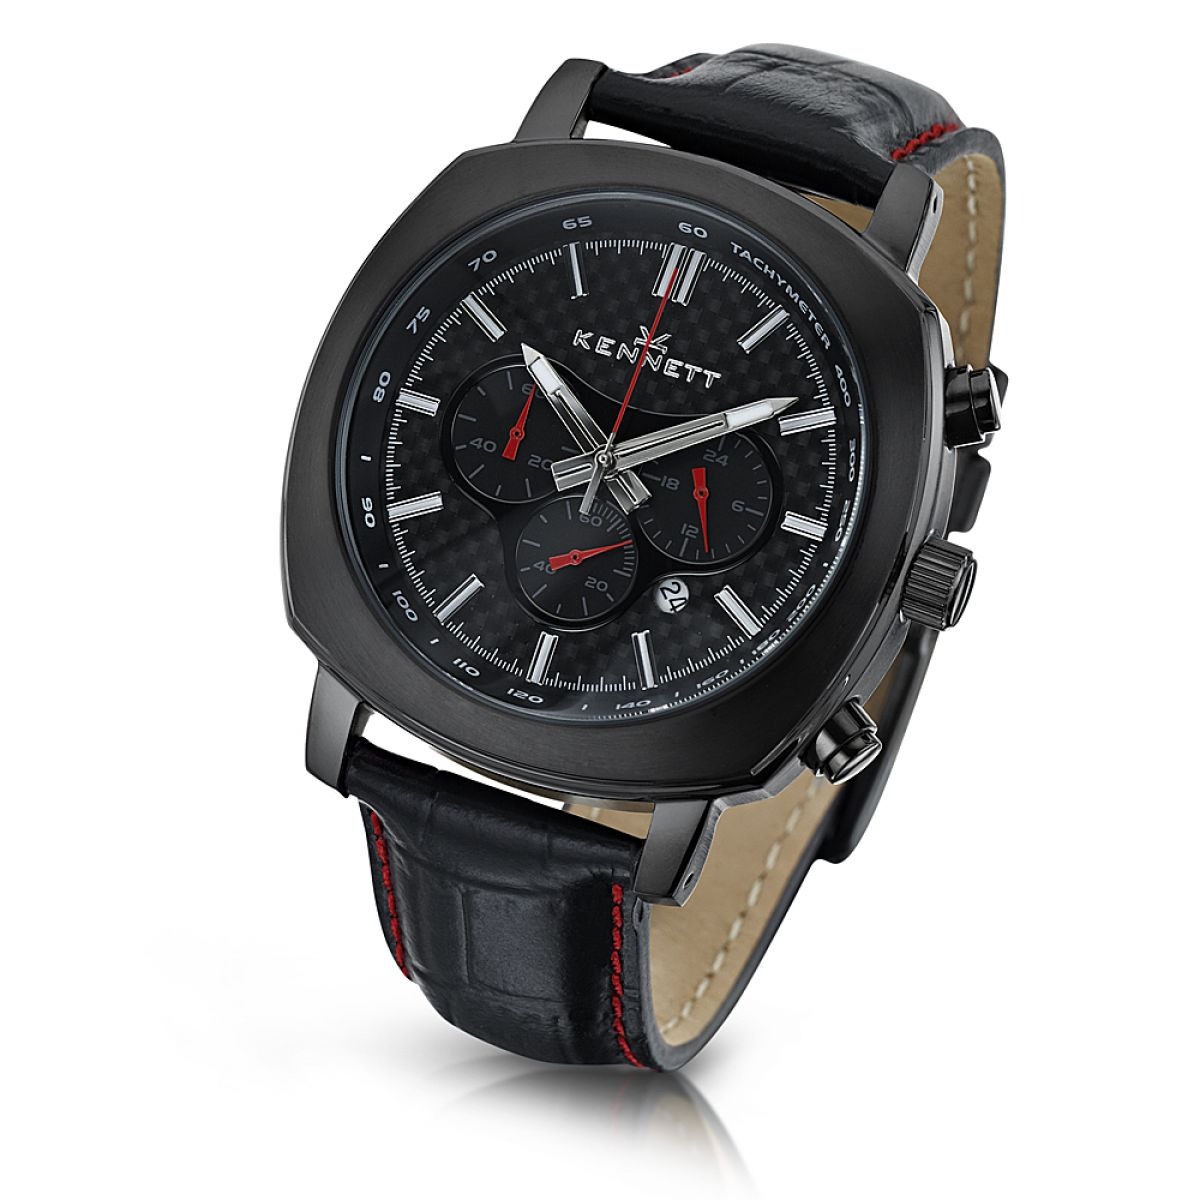 Kennett - Chronograph Watch in Black for Man at Watch Shop GOOFASH